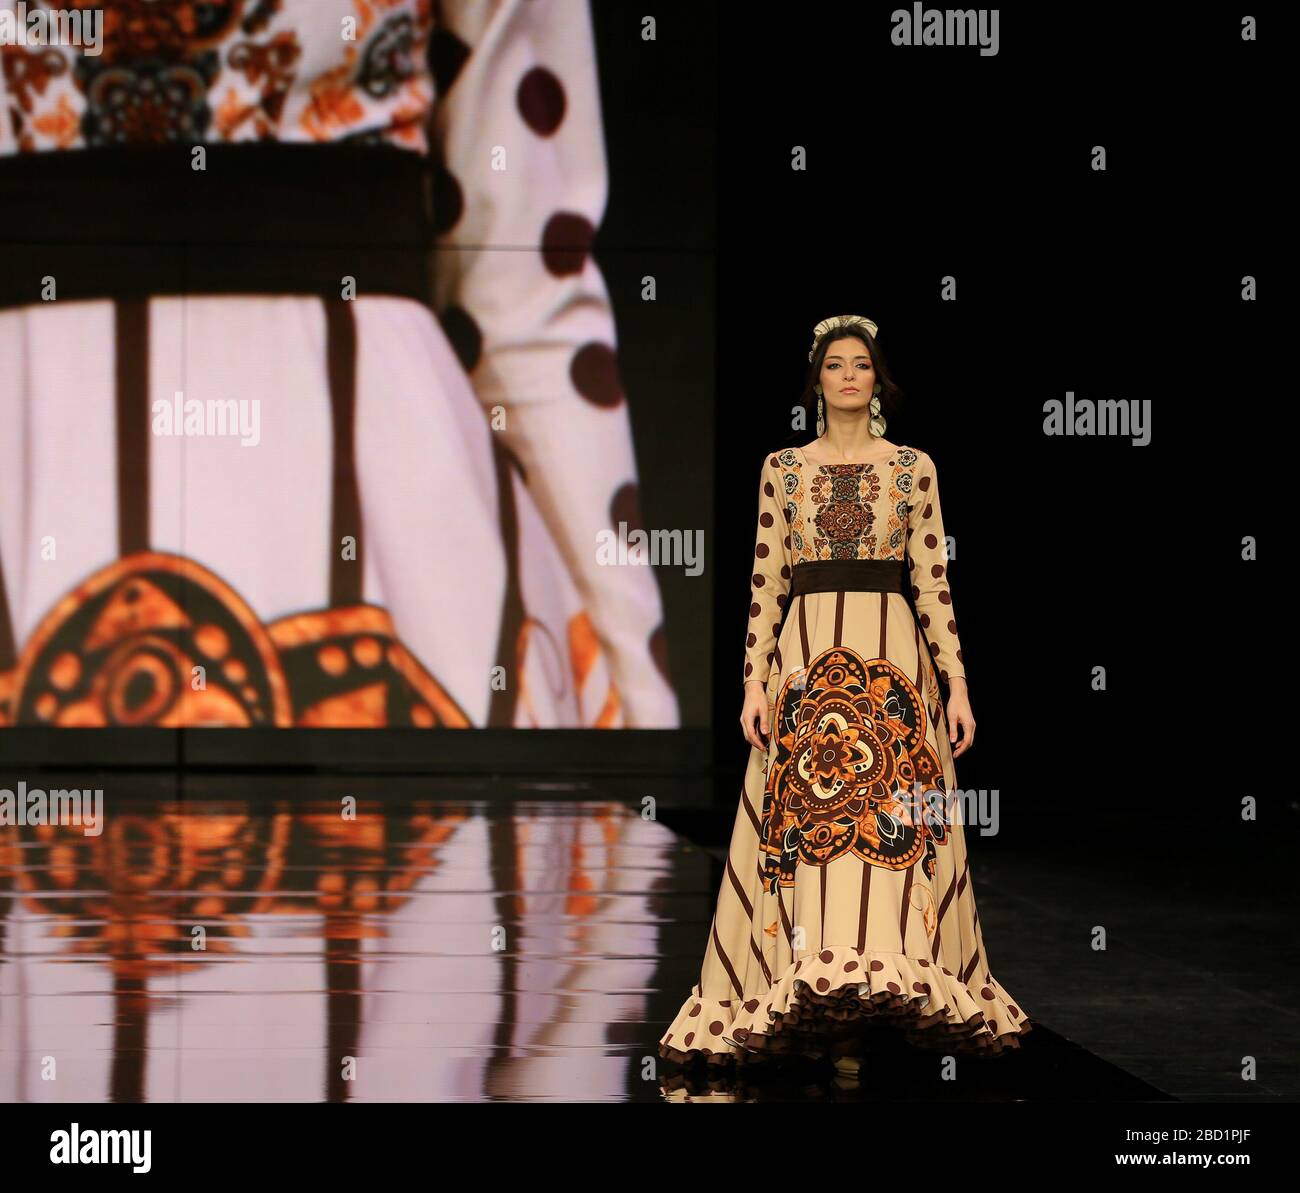 SEVILLA, SPAIN - JAN 30: Model Alicia Abril wearing a dress from the Eboli collection by designer Javier del Alamo as part of the SIMOF 2020 (Photo credit: Mickael Chavet) Stock Photo